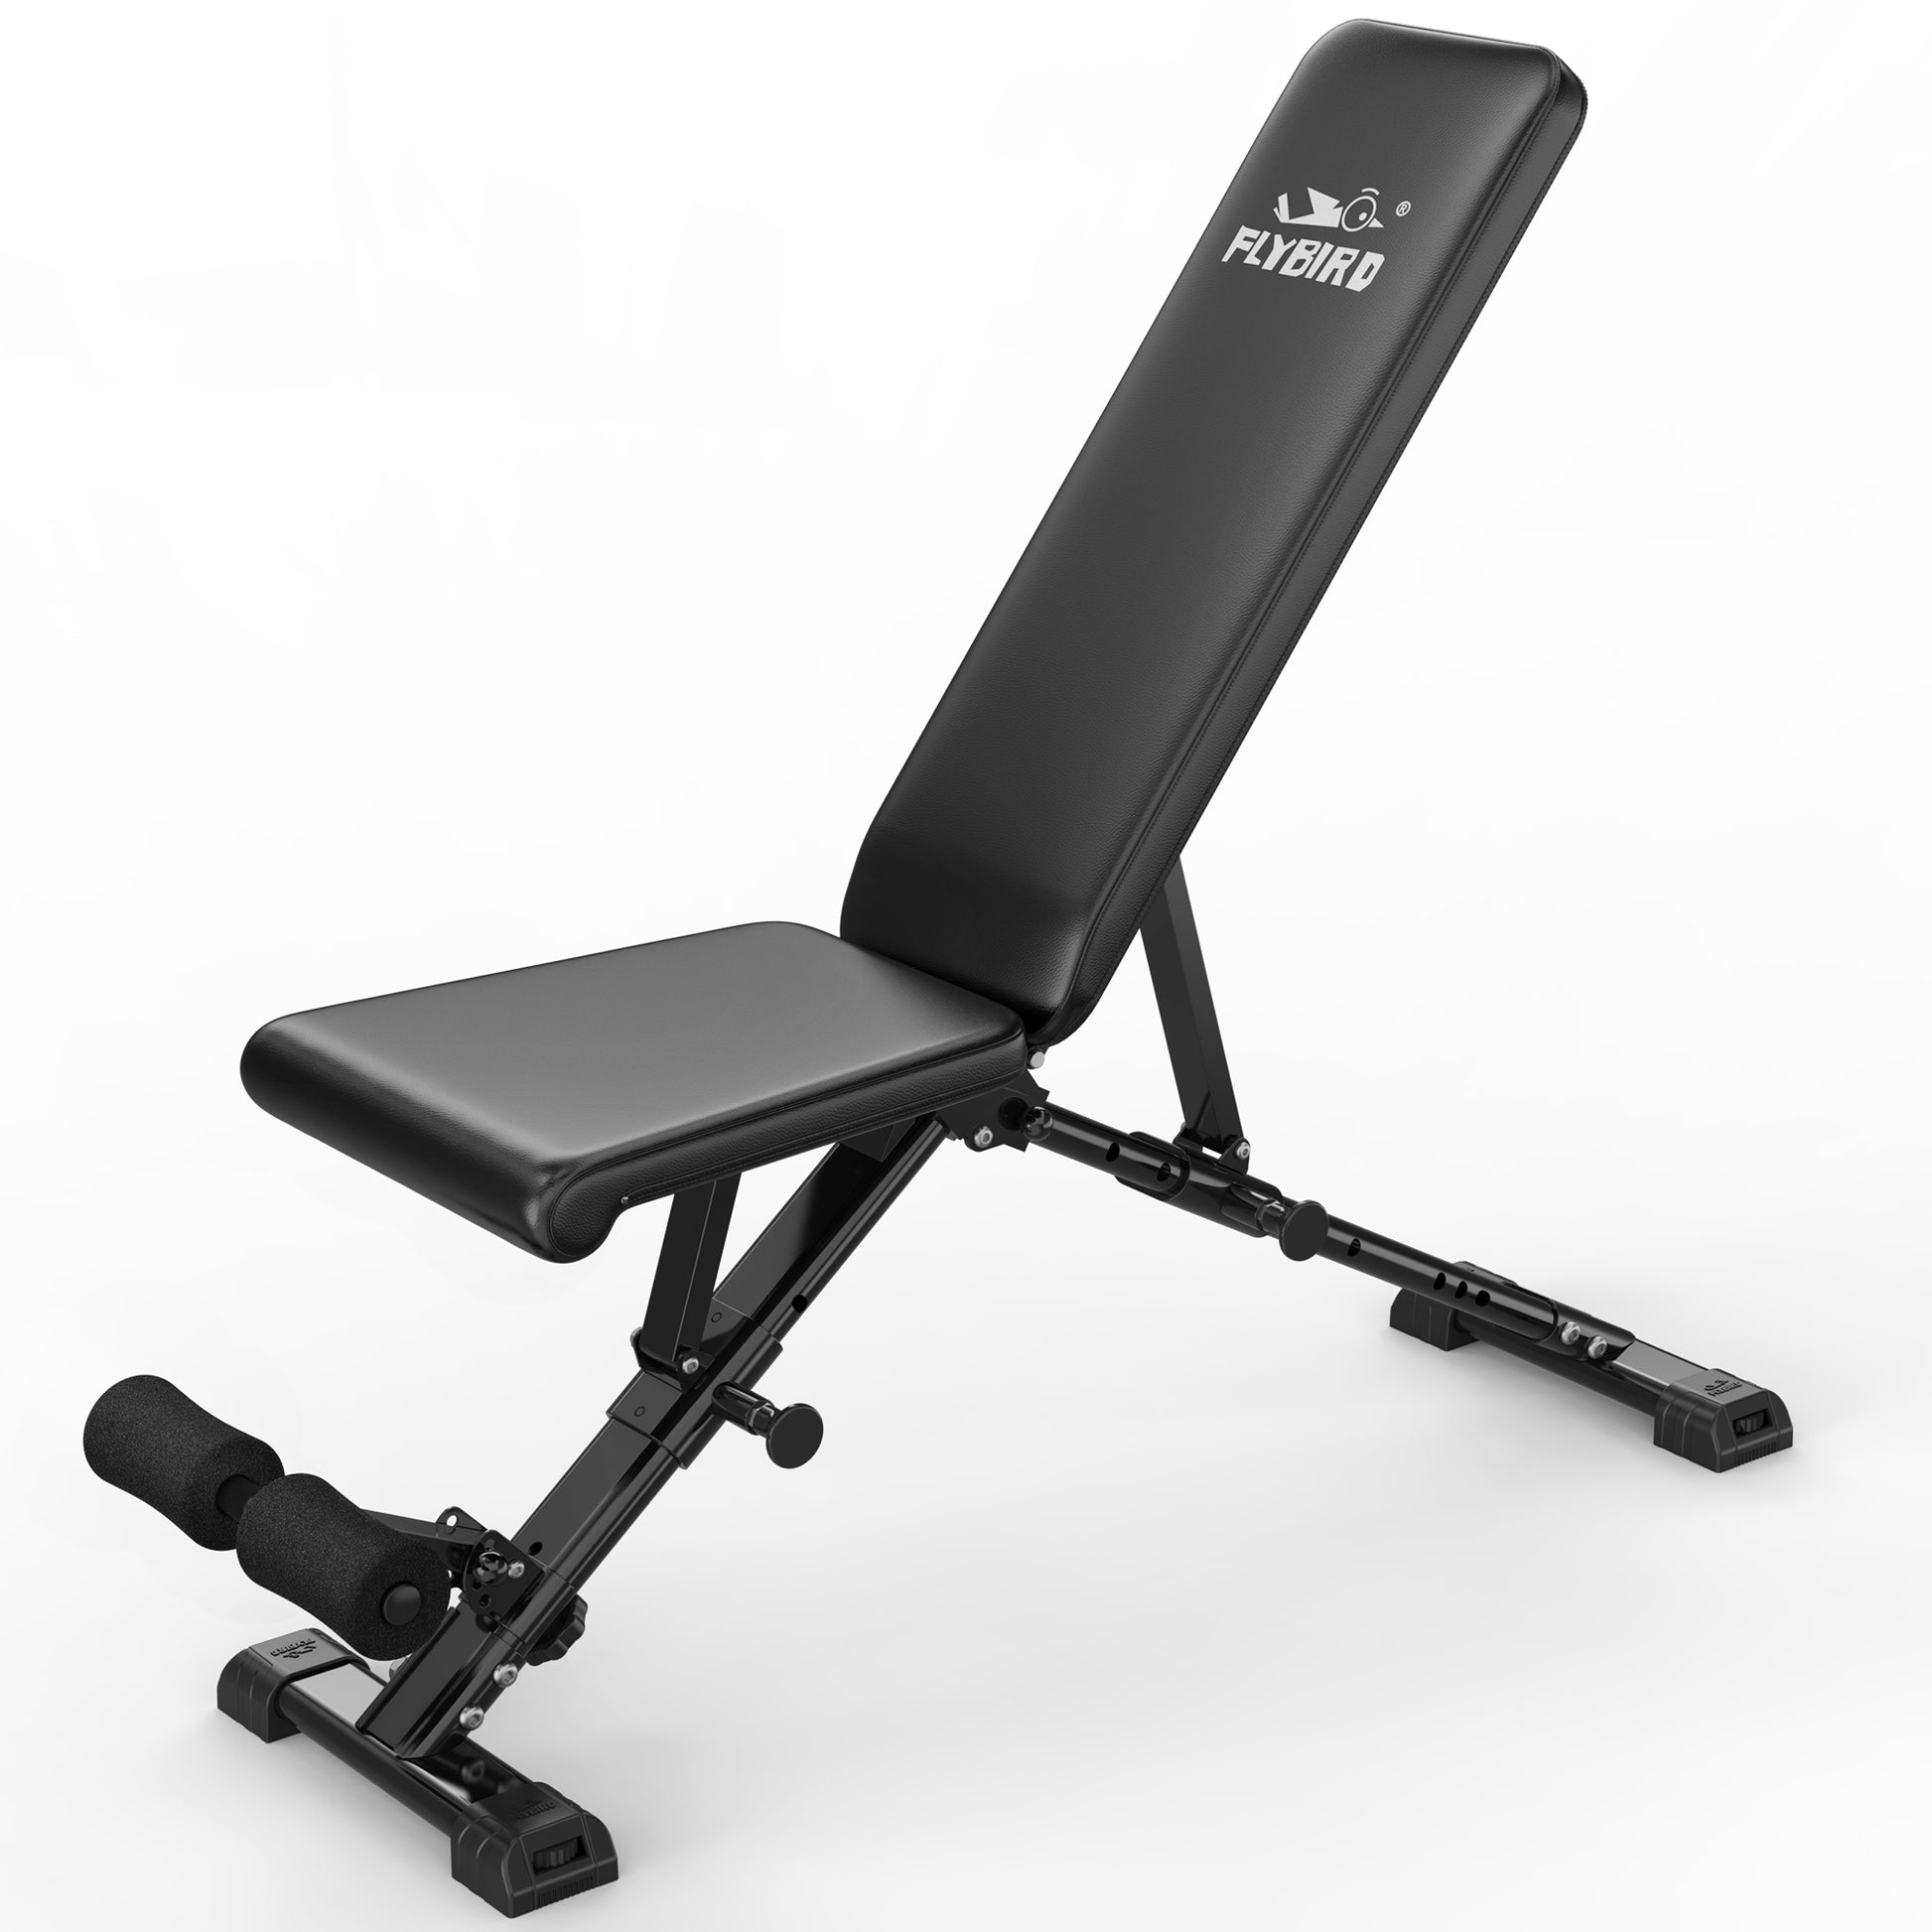 FLYBIRD Adjustable Weight Bench,Utility Workout Bench for Full Body  Workout- Multi-Purpose Foldable incline/decline Bench